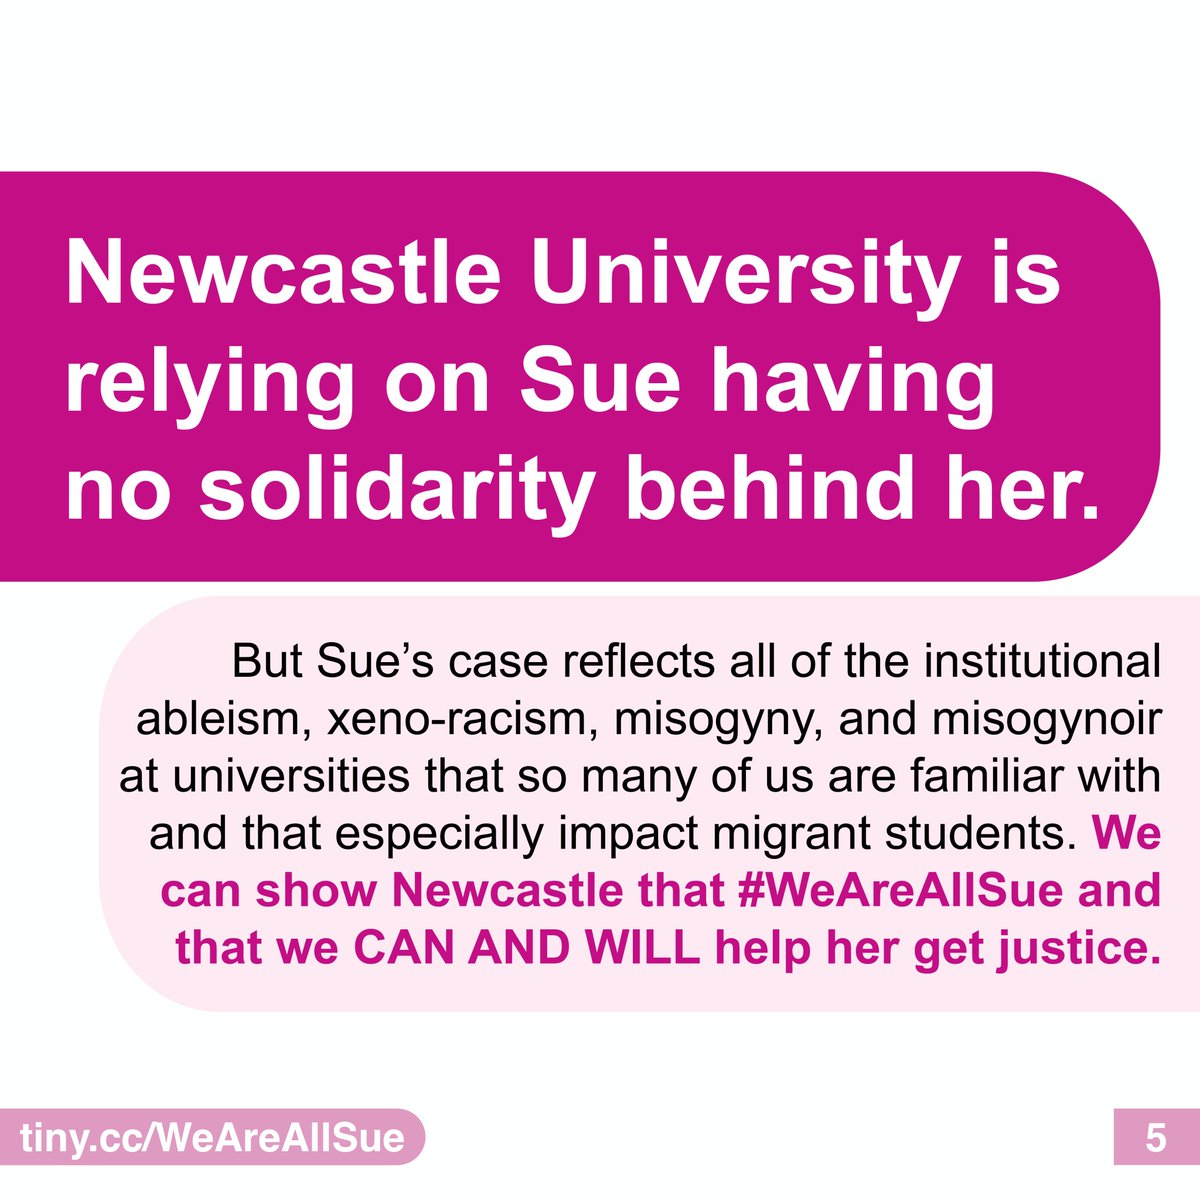 @UniofNewcastle is closing ranks, assuming Sue has no solidarity behind her. But her story resonates with so many who have experienced #misogynoir, #ableism, & xeno-racism in UK universities, especially under #HostileEnvironment.

#WeAreAllSue and we will get her justice!